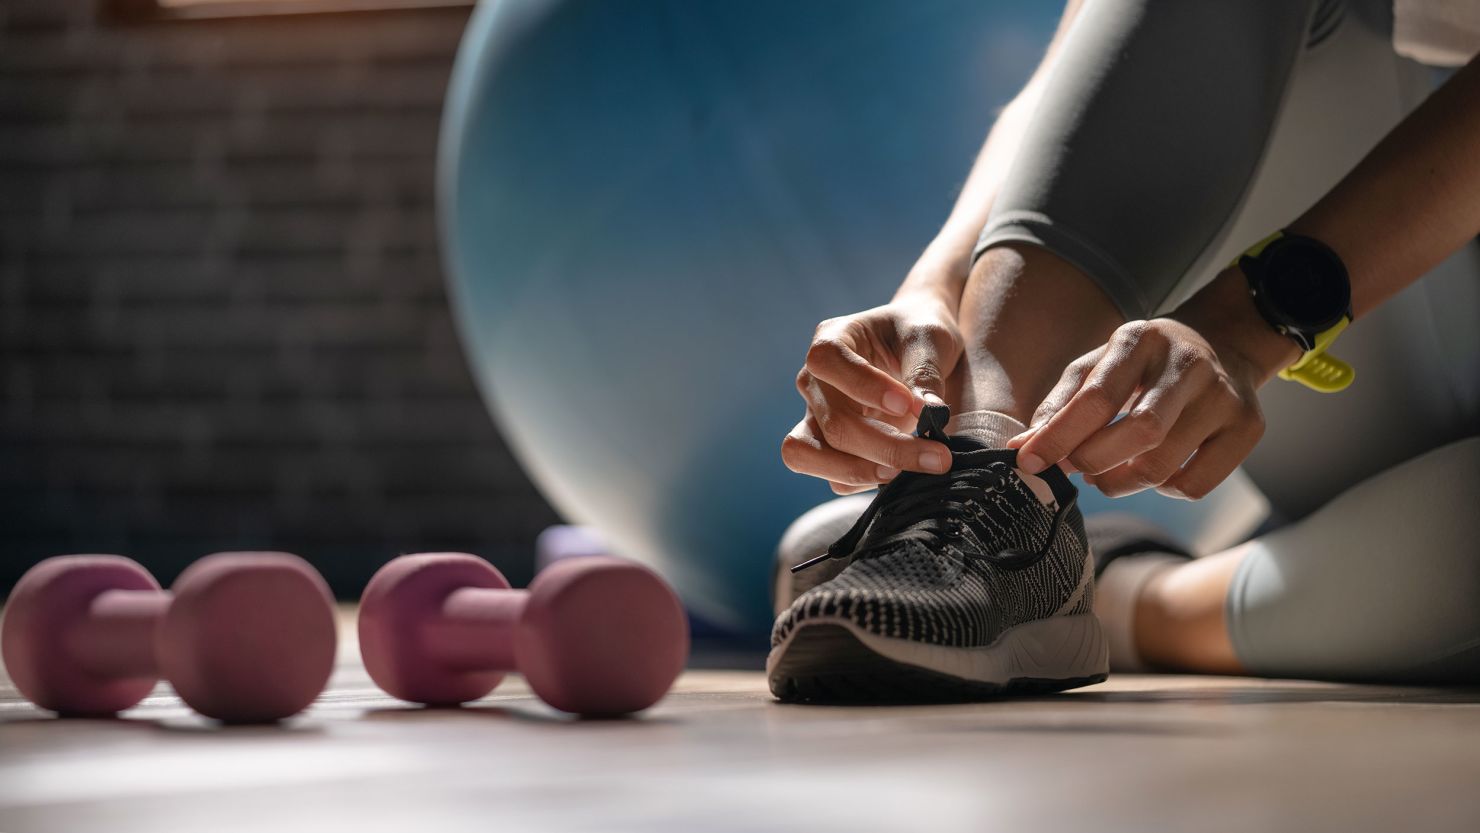 Ready to head back to the gym after being felled by Covid, RSV or influenza? You’ll want to wait at least five to seven days after recovering before packing your gym bag. You shouldn't rush your return from a viral infection.